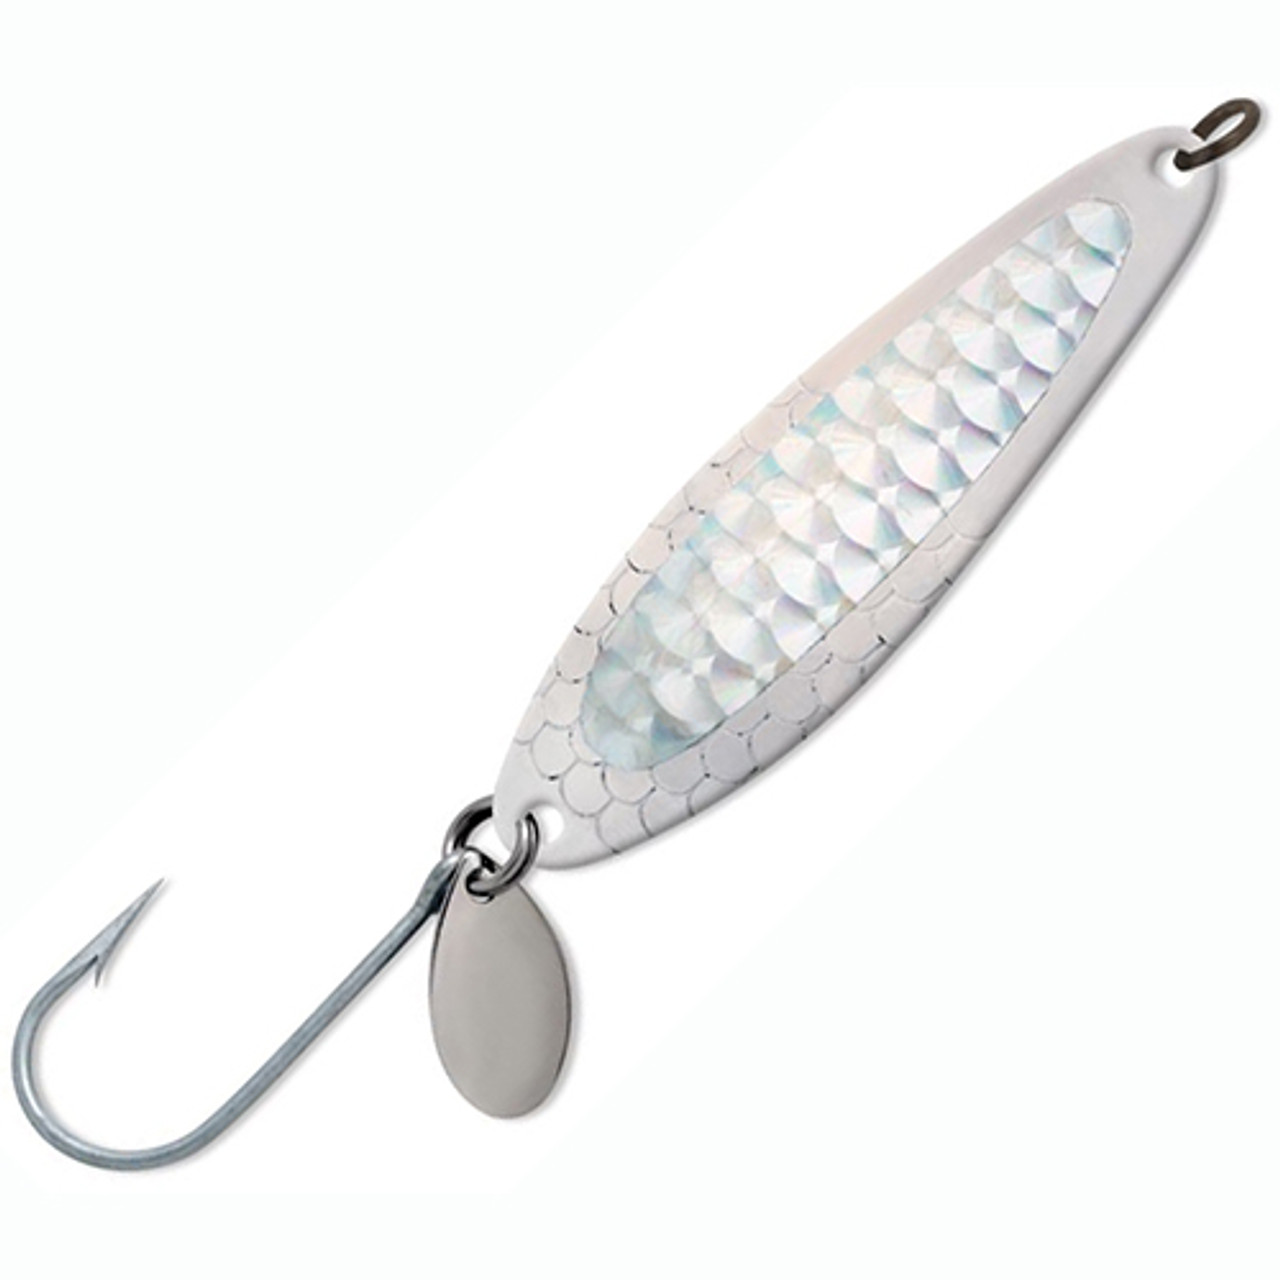 Luhr Jensen Coyote Spoon - Nickel Silver Prism - The Harbour Chandler